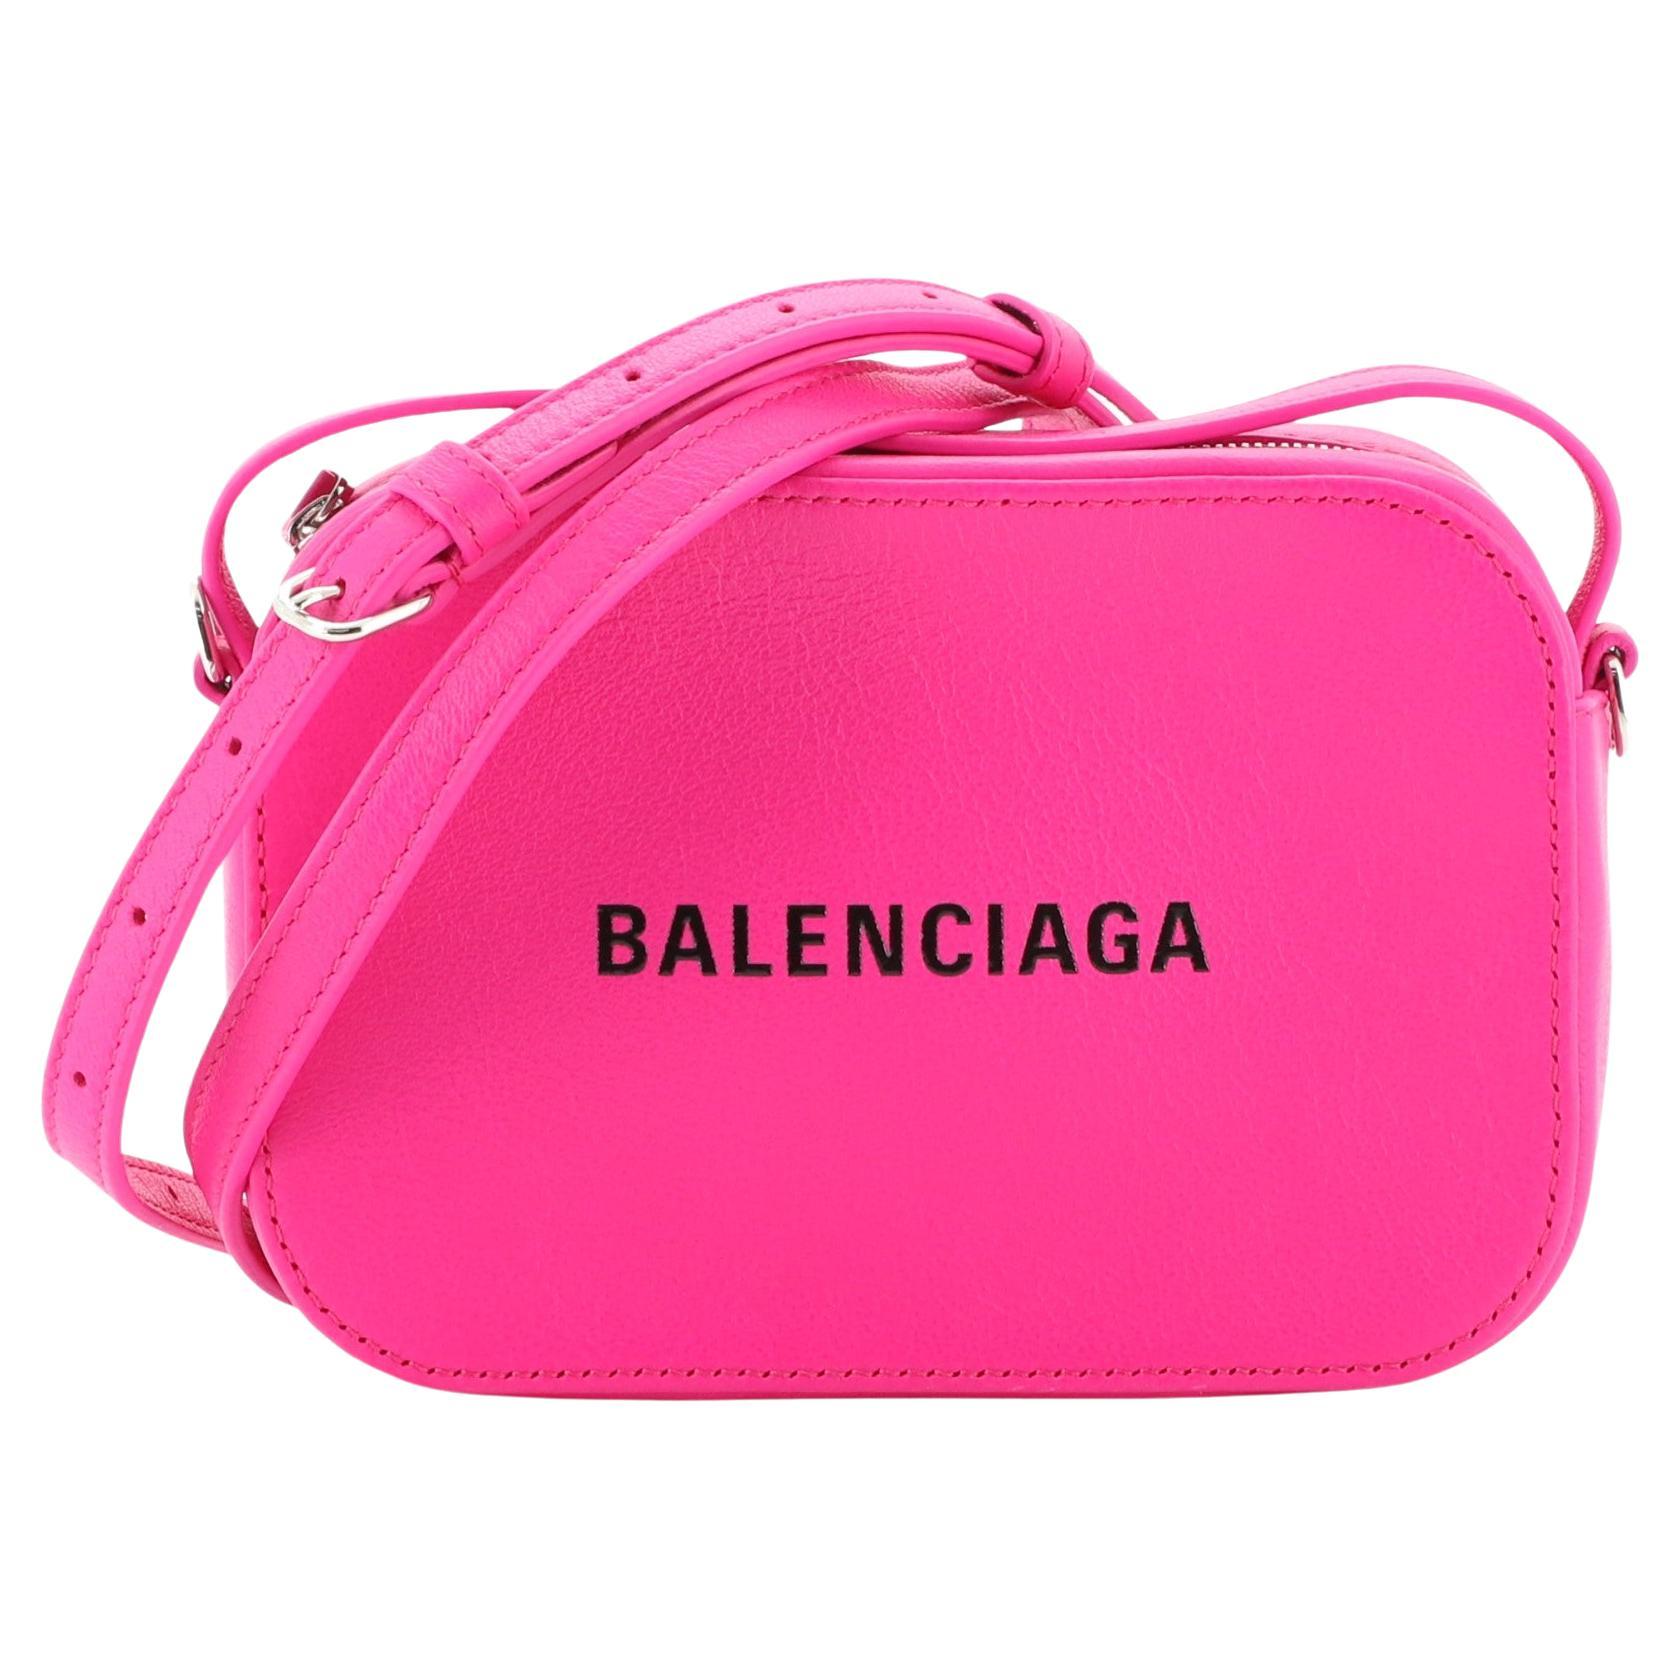 Balenciaga Pink Leather Motocross Giant 12 Hip Bag Italy w/ Dust Bag at ...